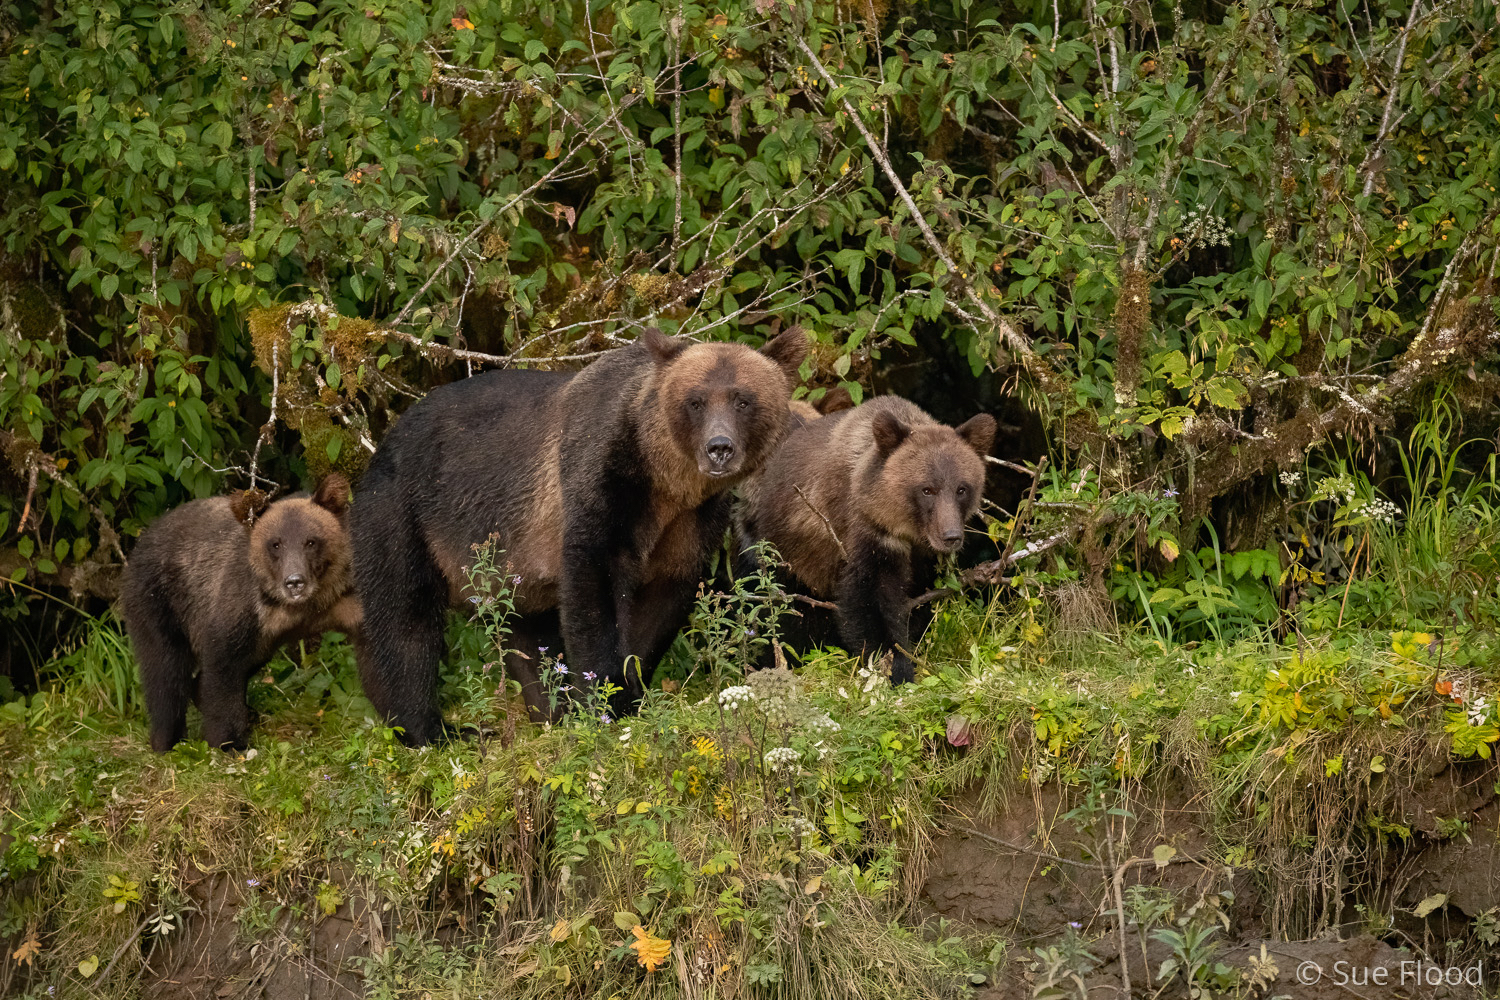 Grizzly bear sow and cubs, Great Bear Rainforest, British Columbia, Canada.